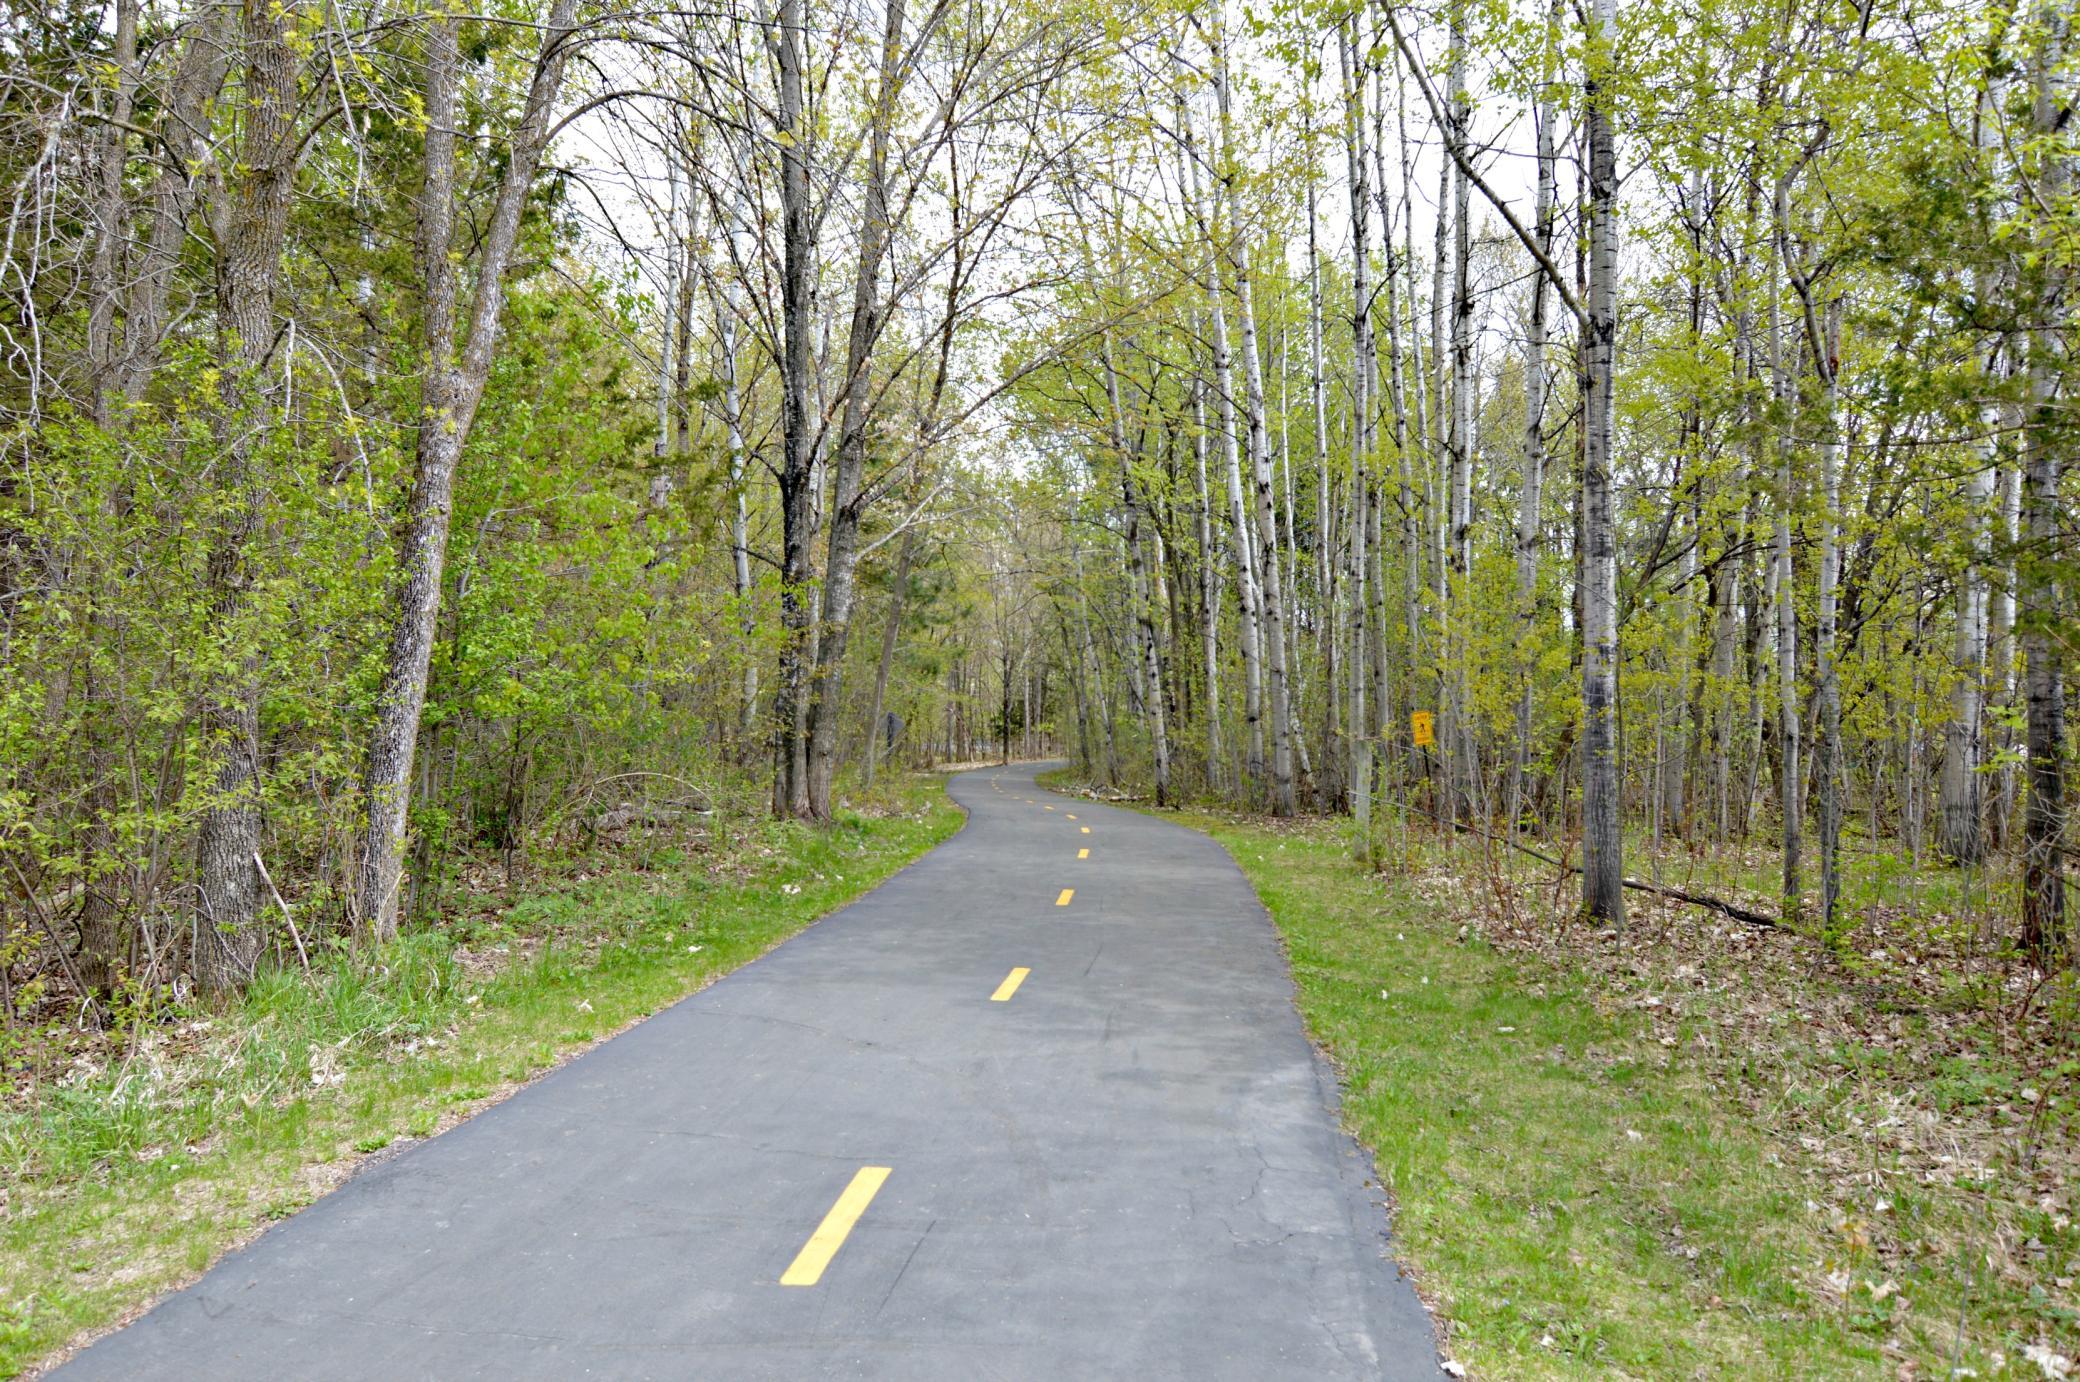 Home to 4,900 acres of recreational bliss and walking distance from your new home, Elm Creek Park is an outdoor haven and features activities for all seasons - including biking, running, swimming, playing, skiing, tubing, a nature center and more!!